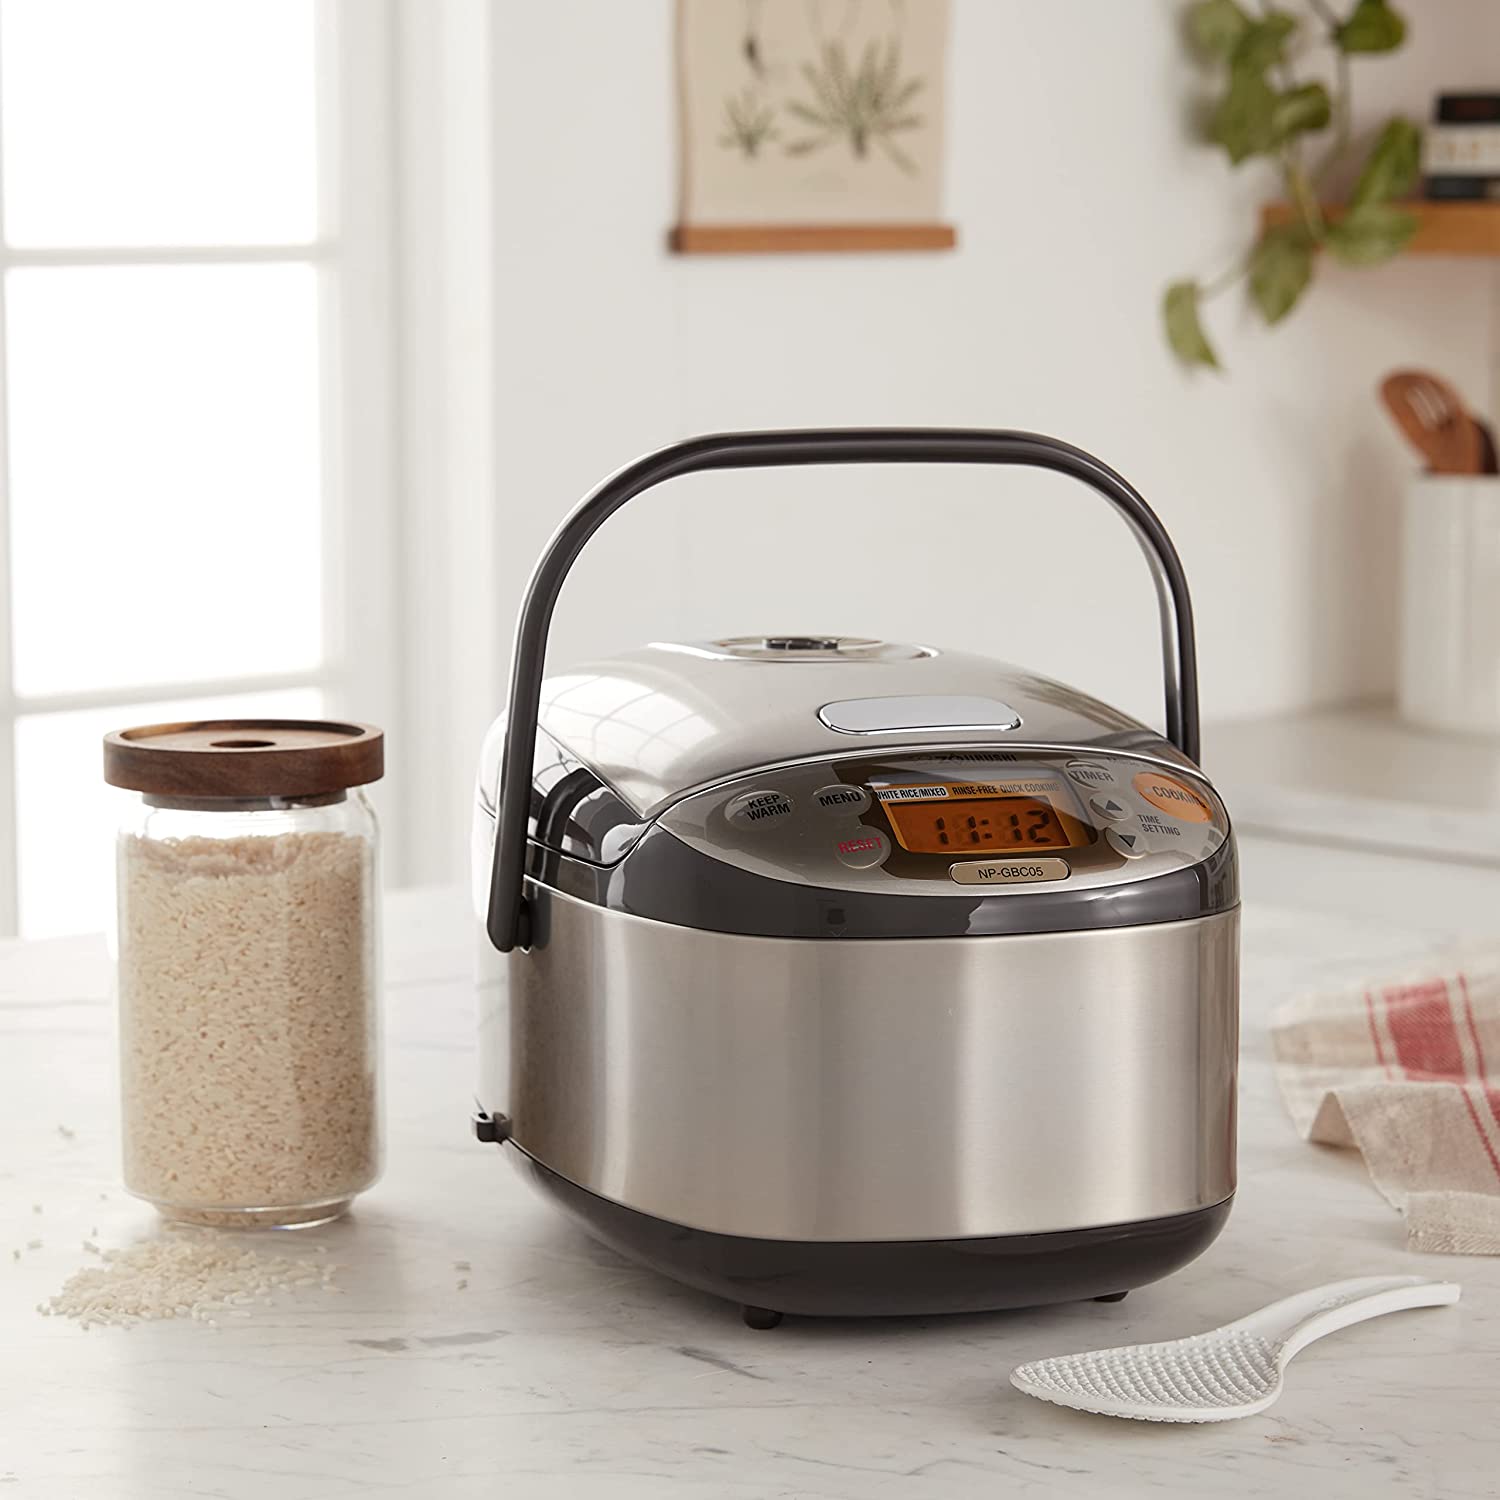 Zojirushi Induction Heating Rice Cooker and Warmer, 3 Cups